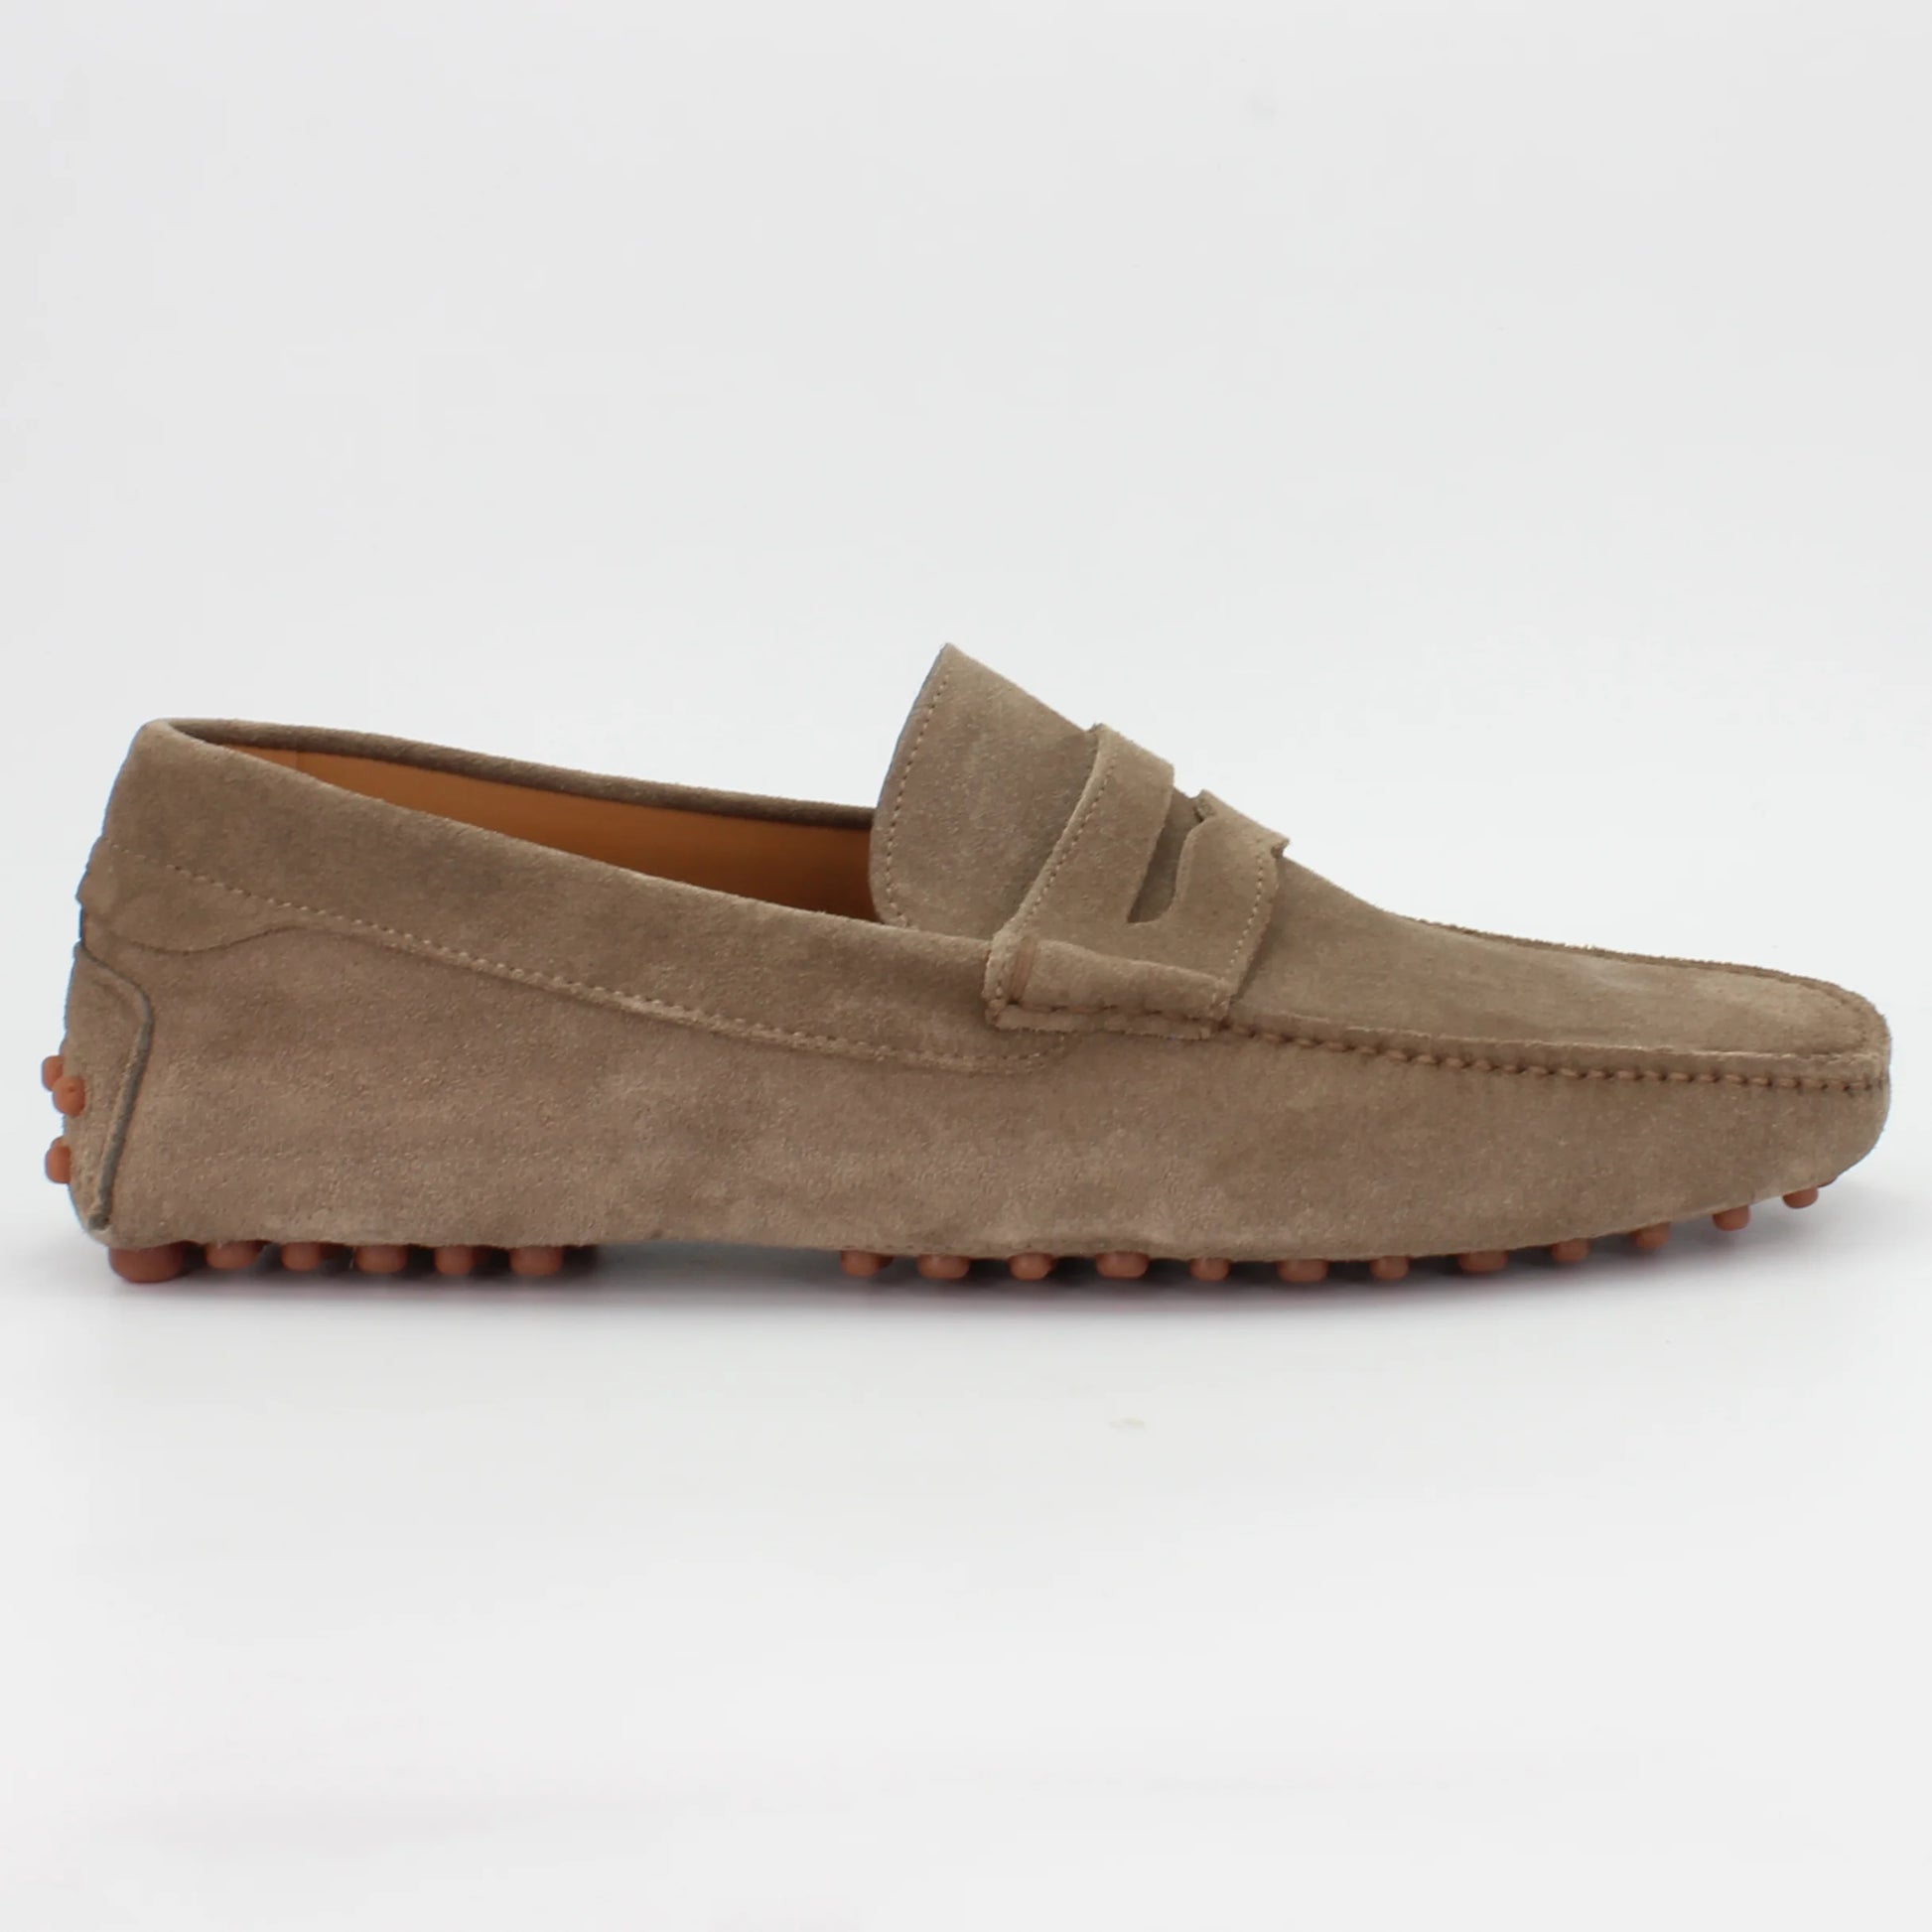 Shop Handmade Italian Leather suede moccasin in almond velour (UO460002) or browse our range of hand-made Italian shoes for men in leather or suede in-store at Aliverti Cape Town, or shop online. We deliver in South Africa & offer multiple payment plans as well as accept multiple safe & secure payment methods.